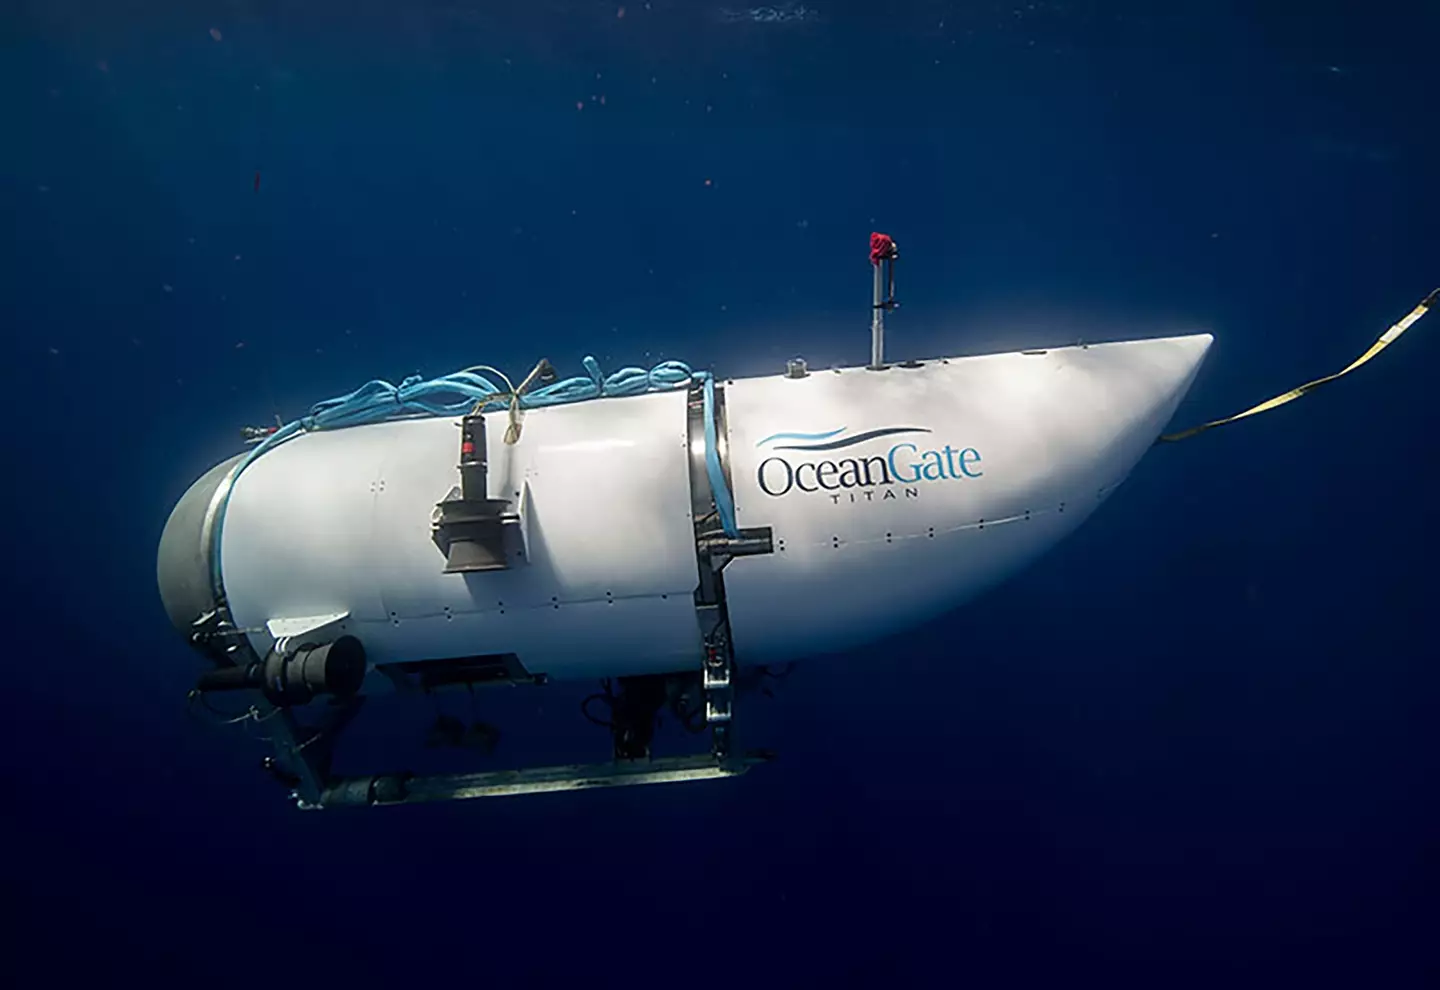 The Titan submersible's oxygen supply is running dangerously low.